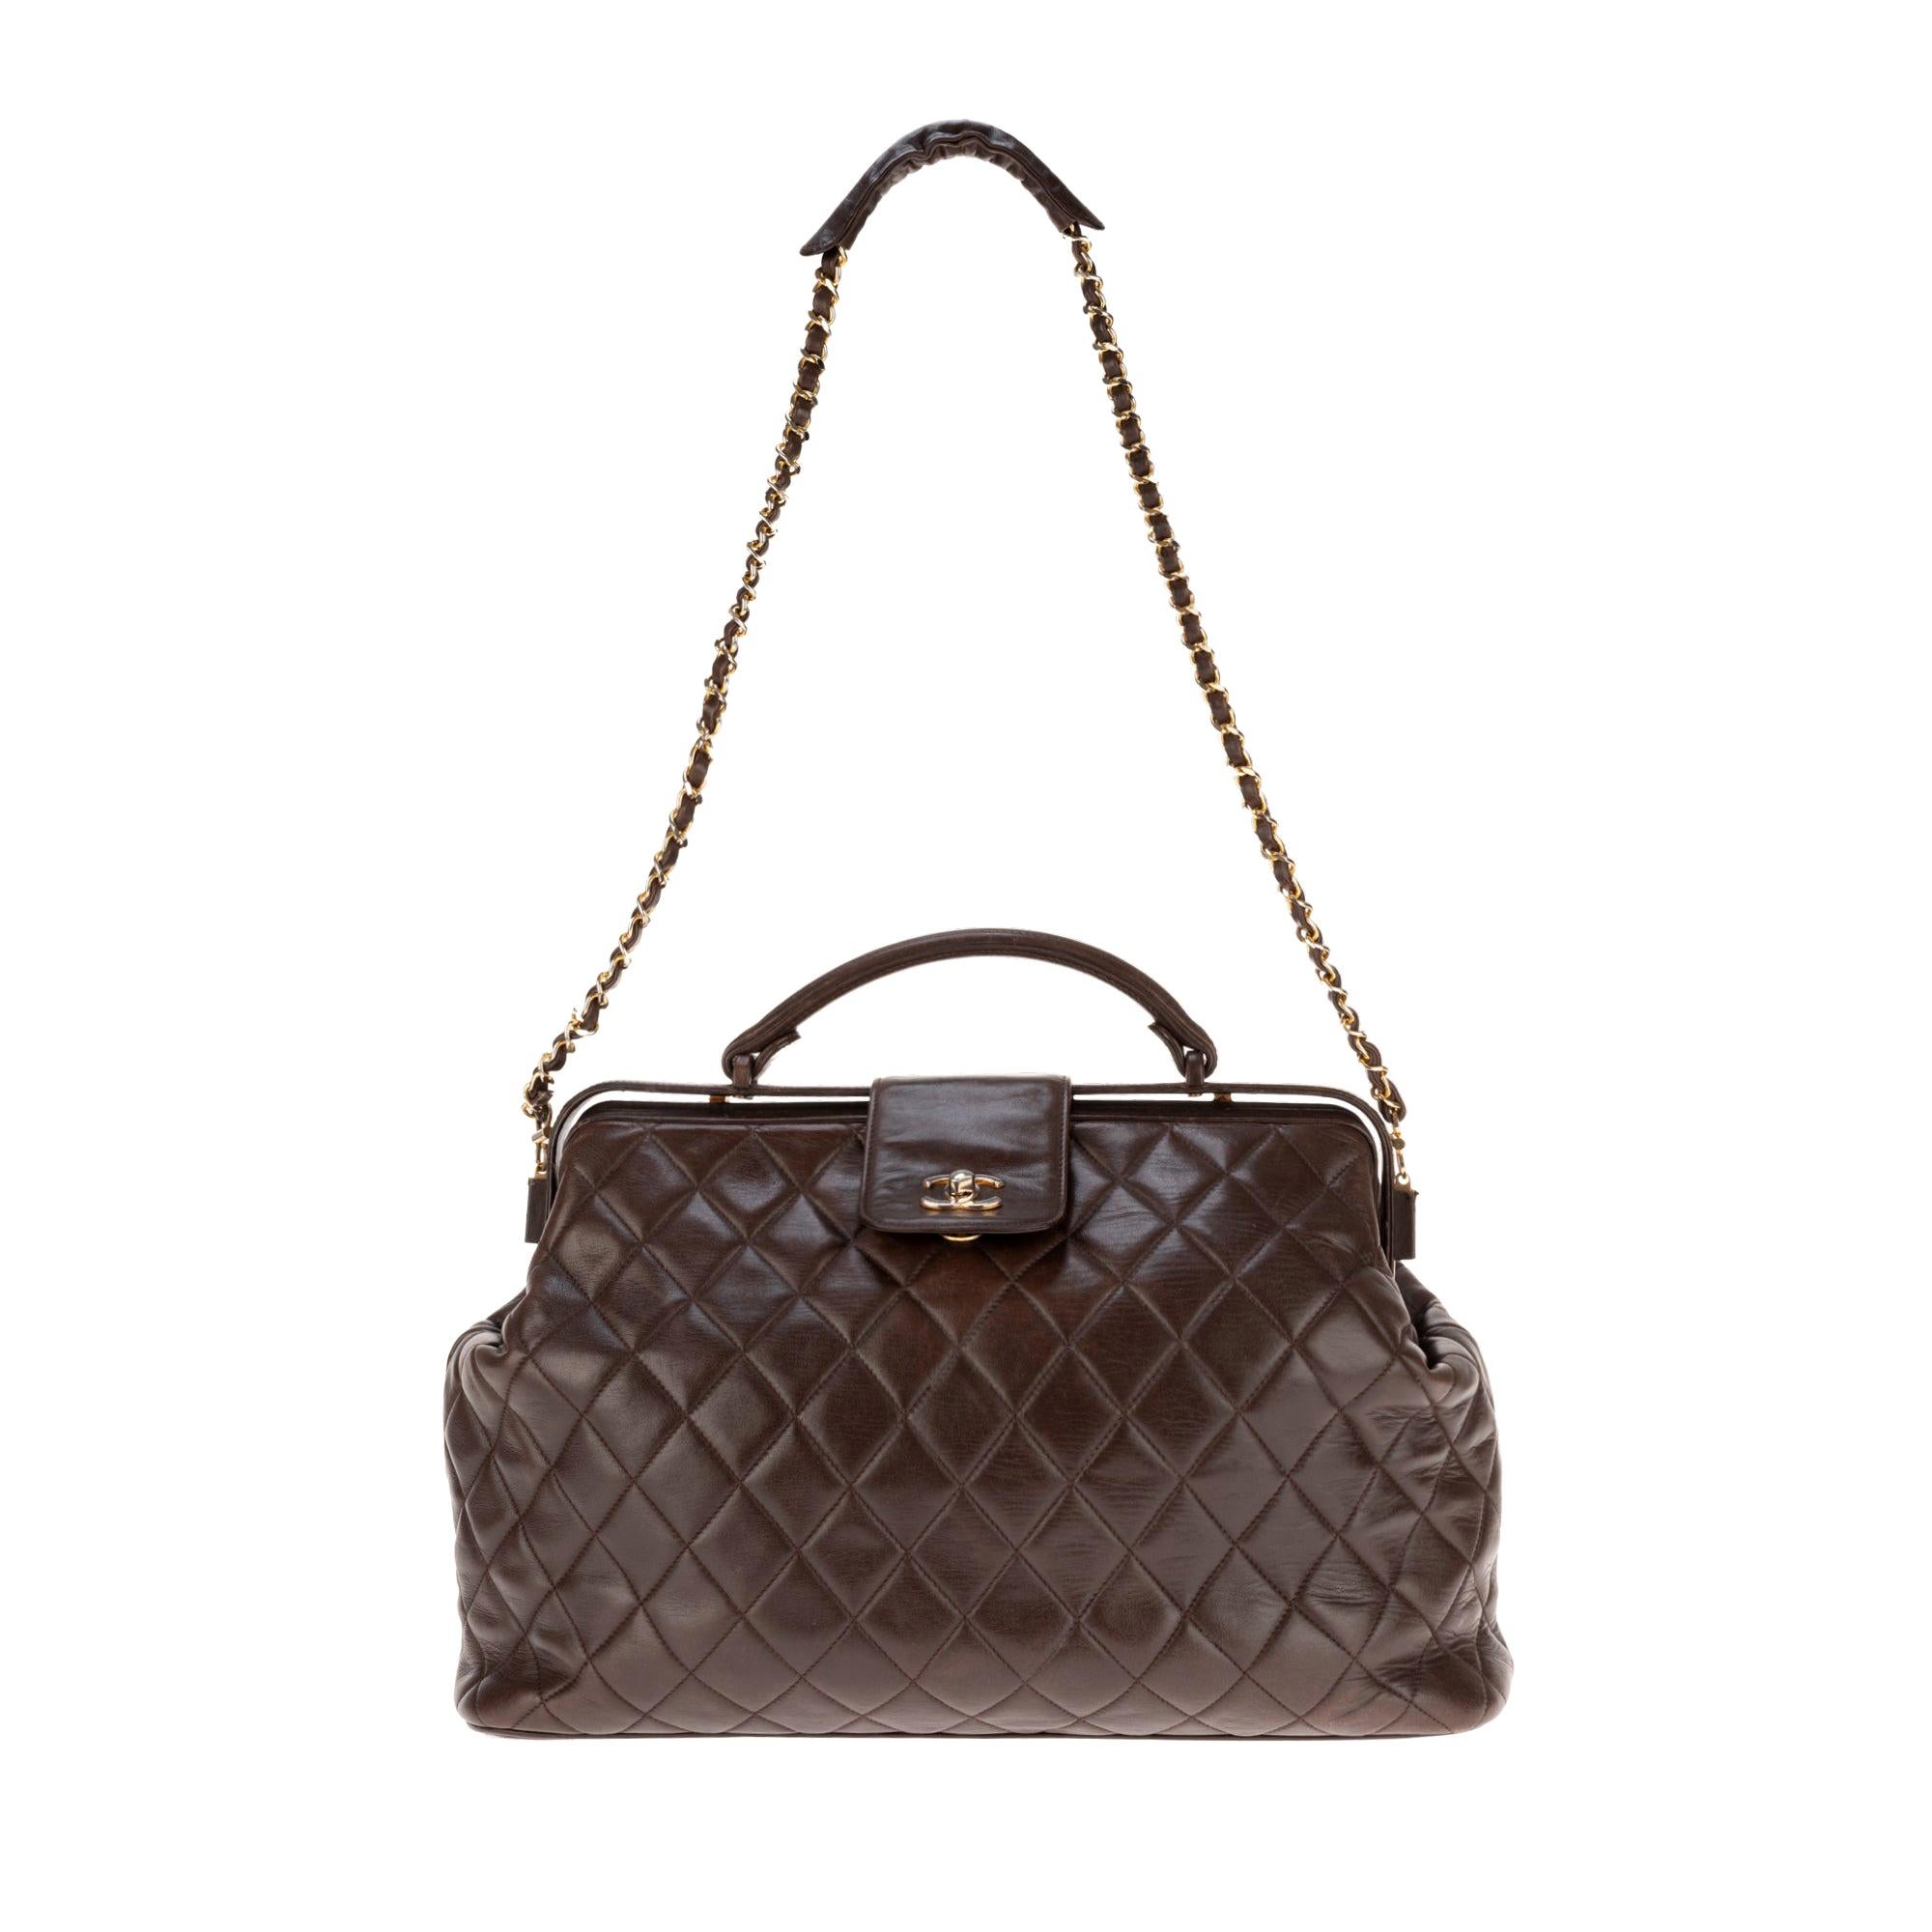 Chanel briefcase style handbag in brown quilted lambskin !